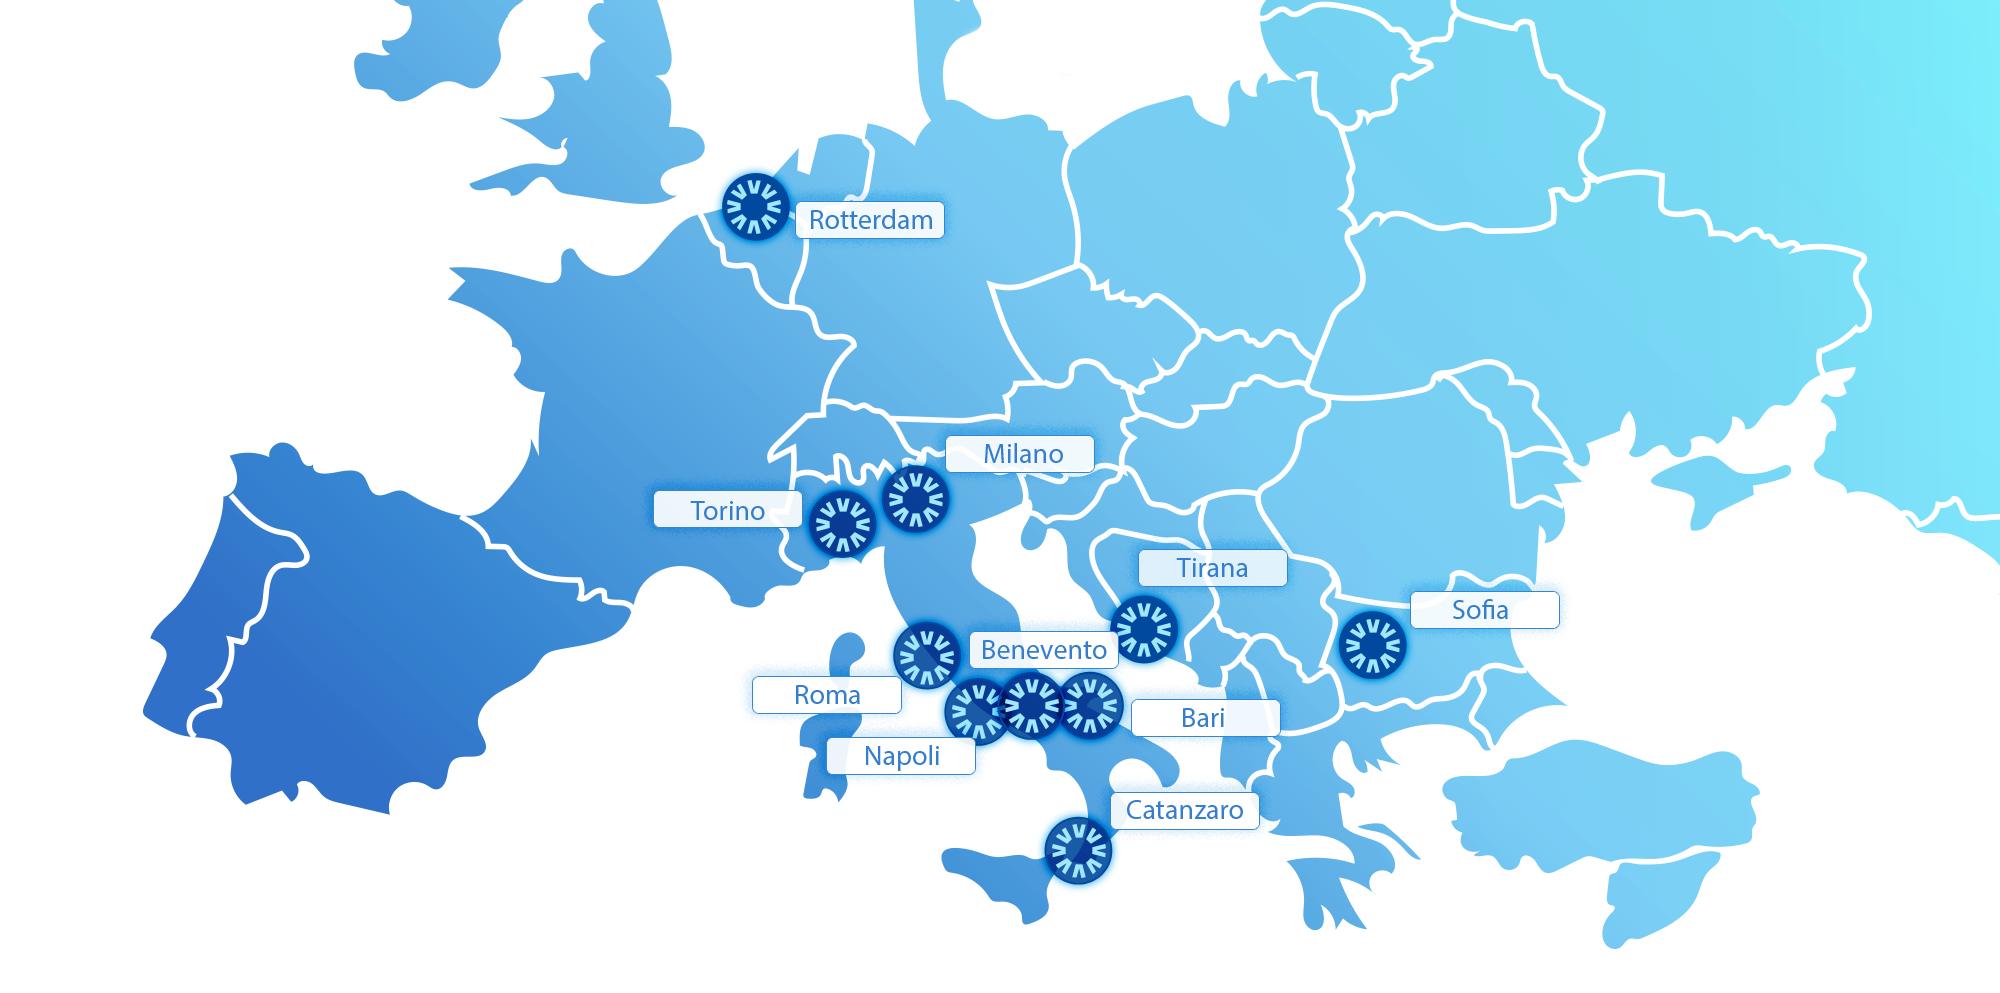 Europe map of Innovaway presence